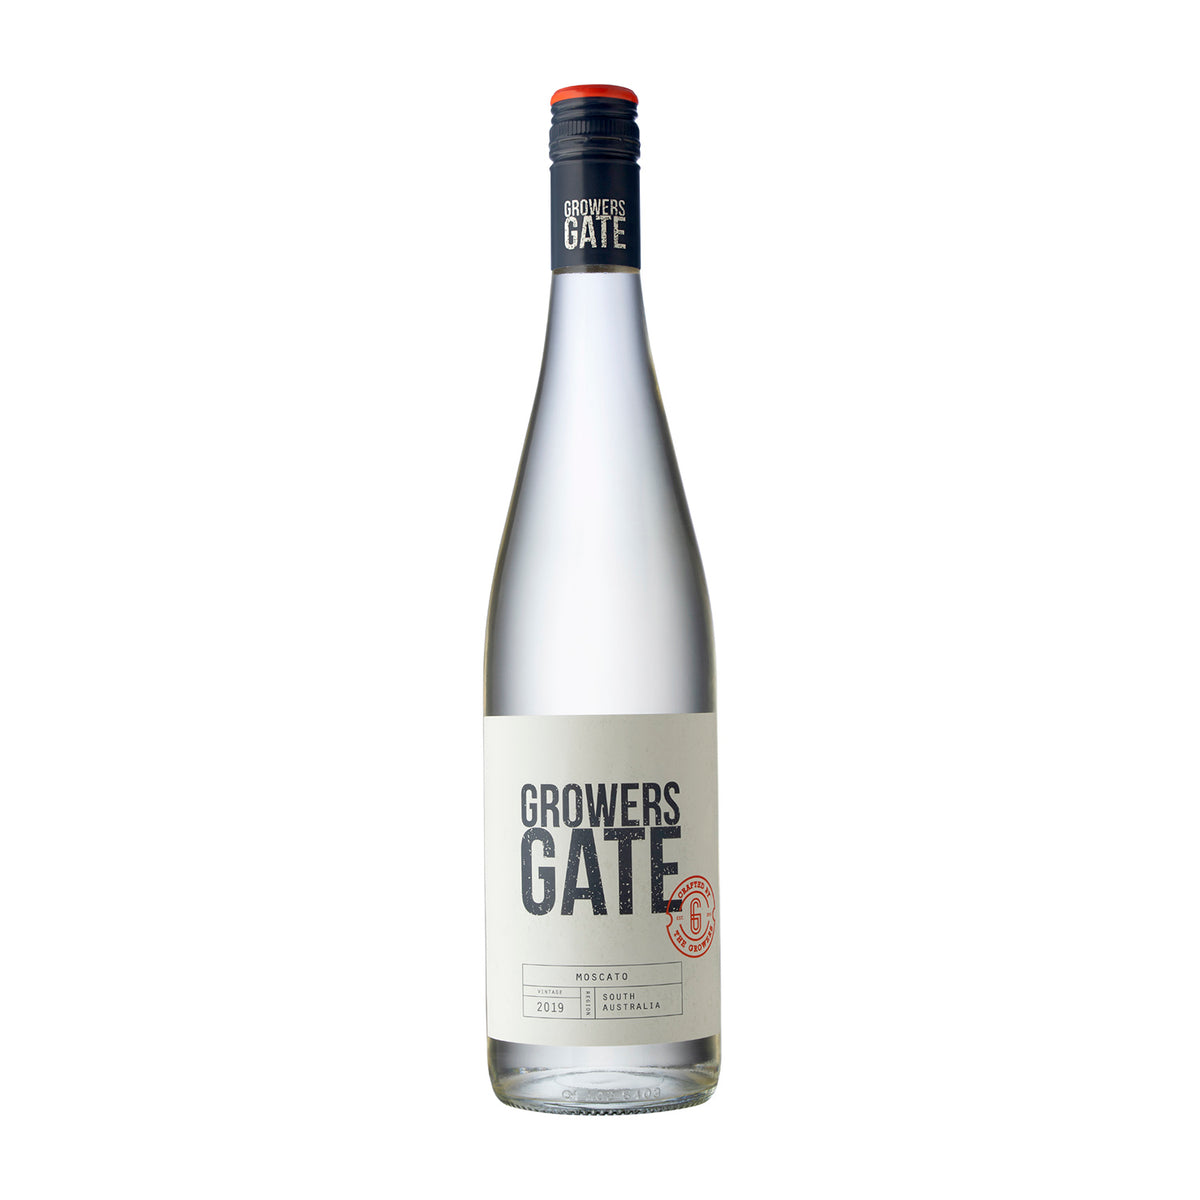 Growers Gate Moscato